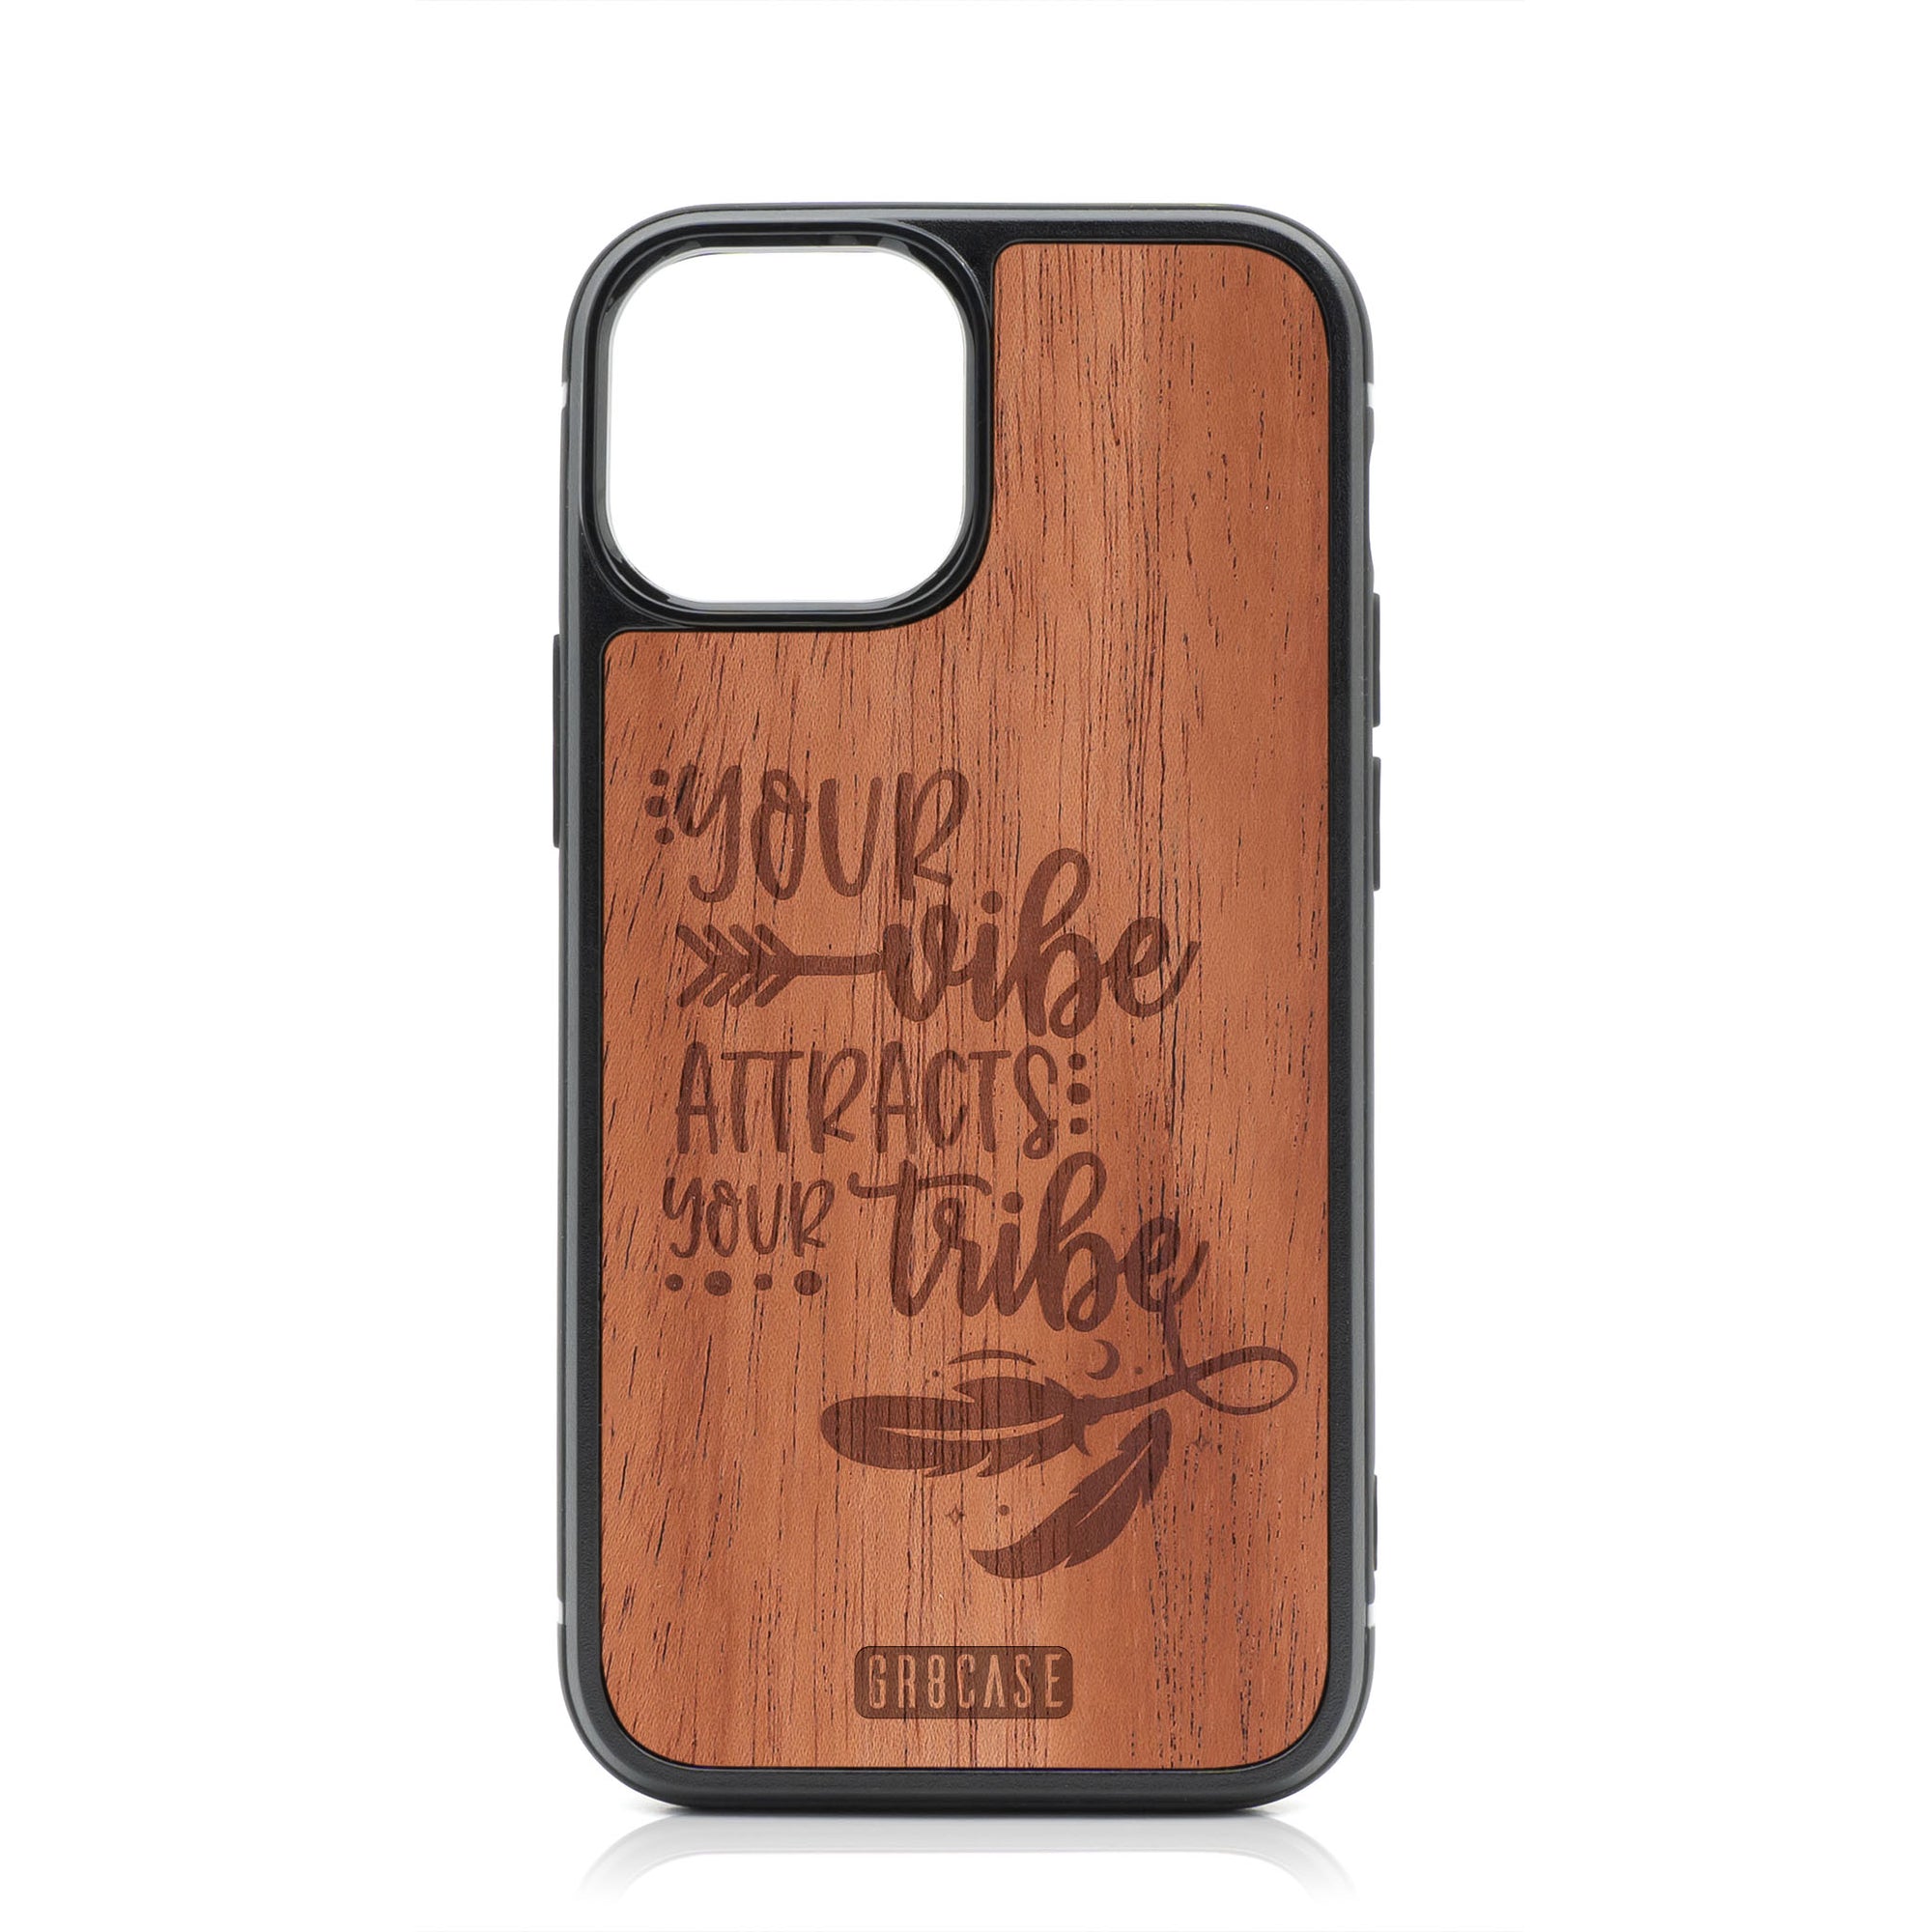 Your Vibe Attracts Your Tribe Design Wood Case For iPhone 13 Mini